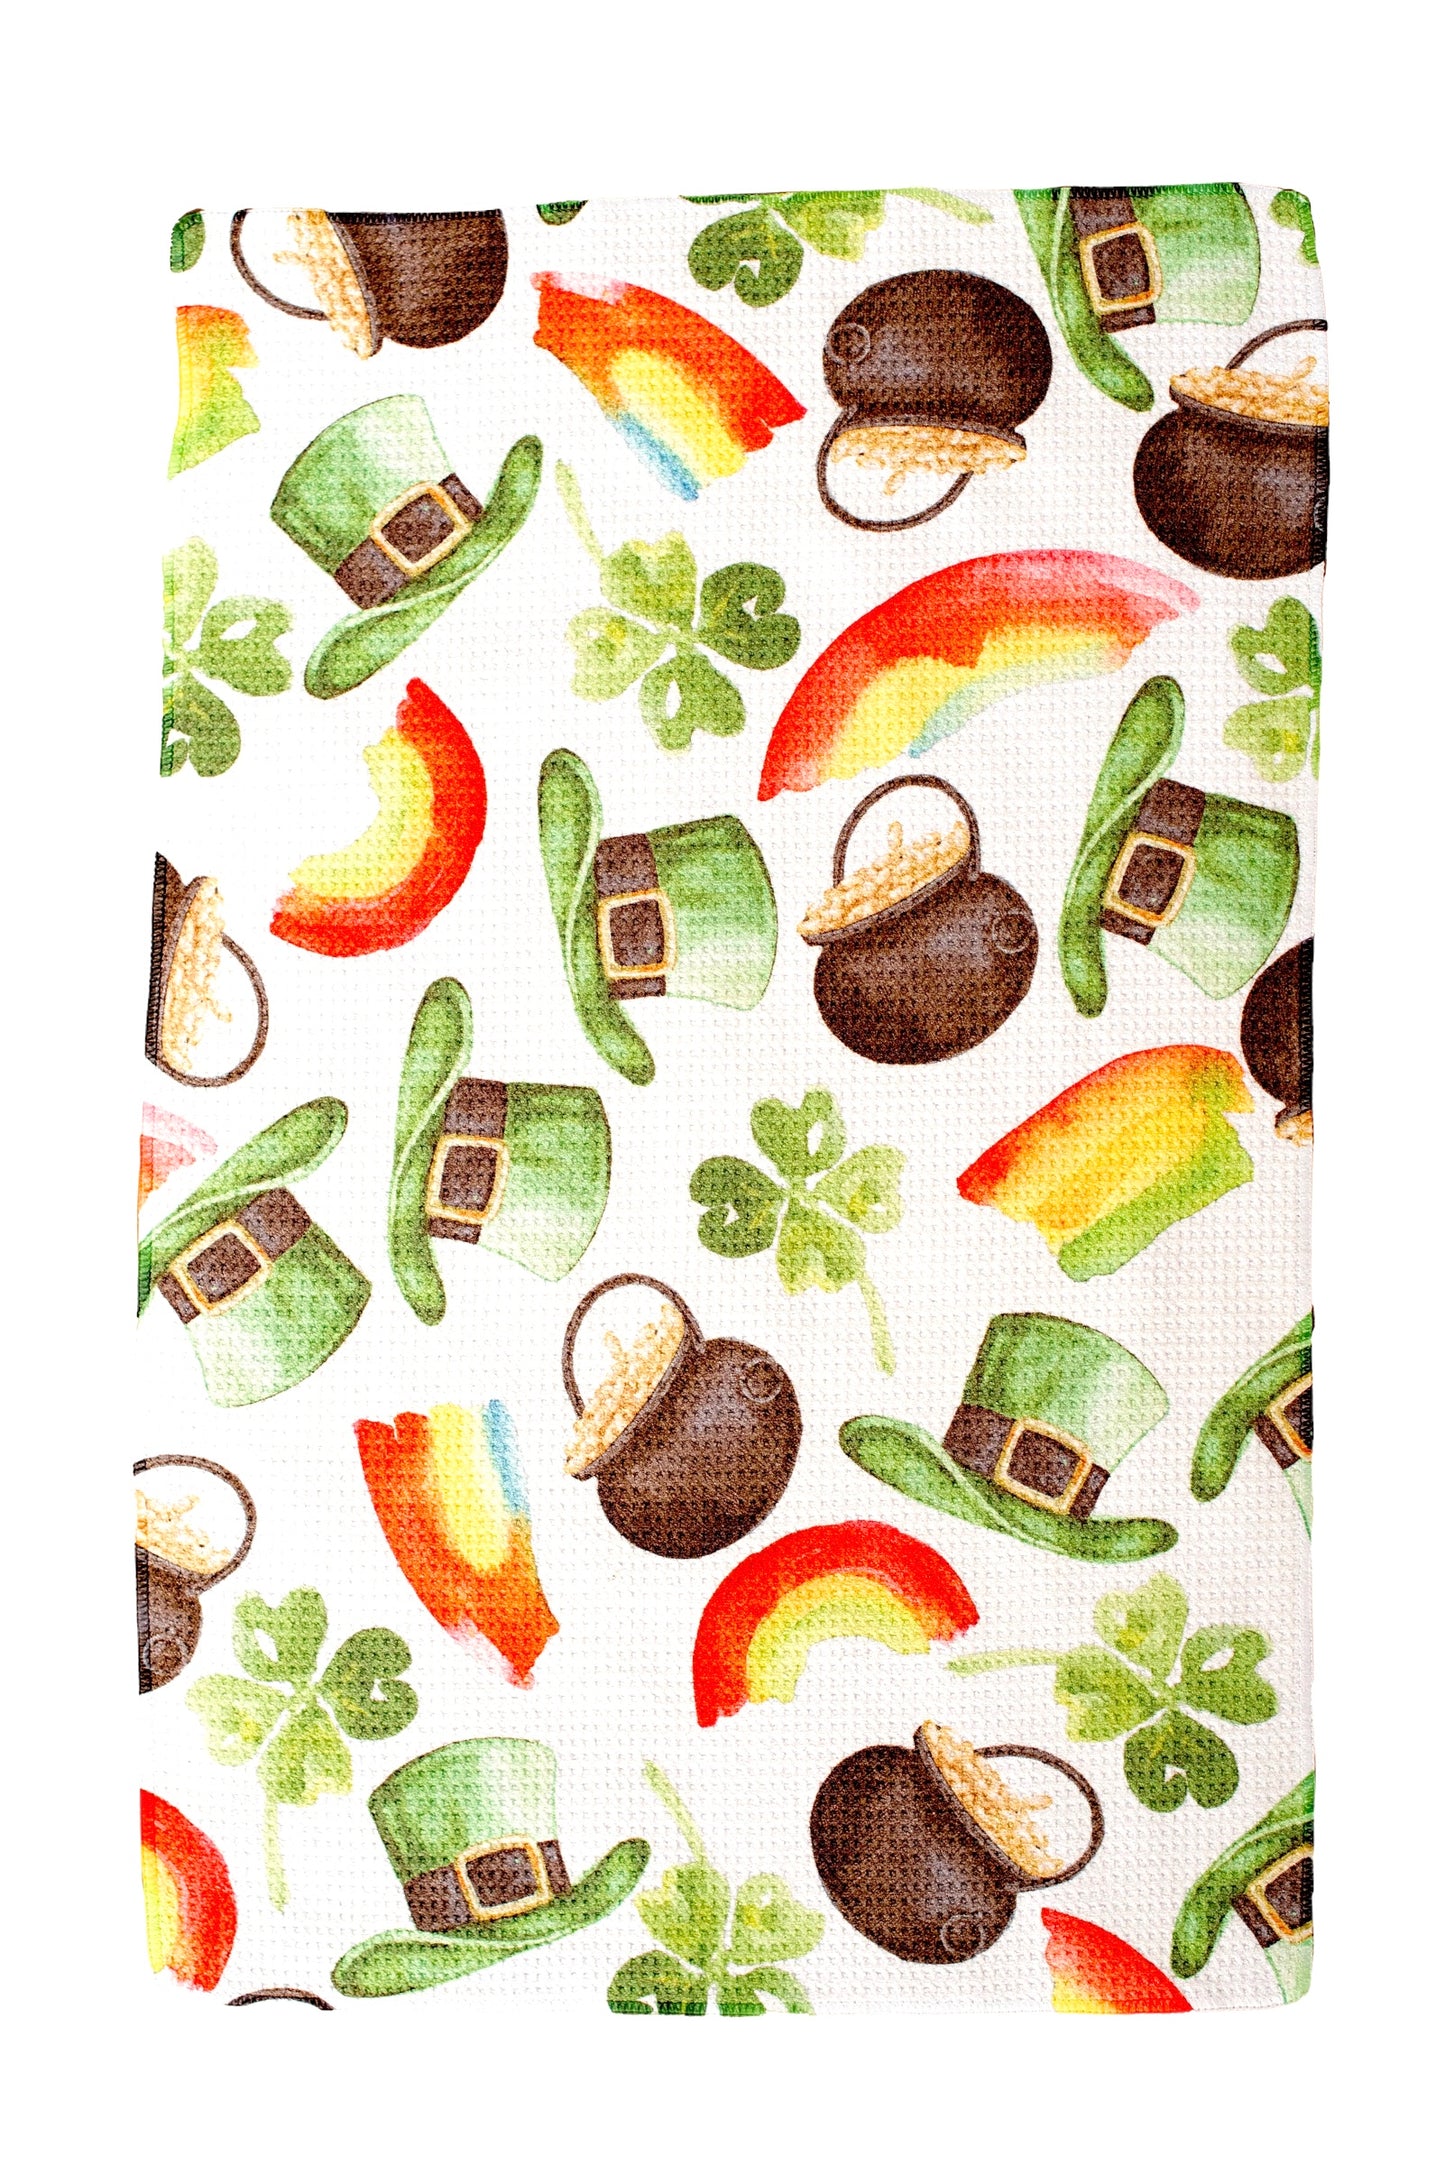 Pot of Gold: Single-Sided Hand Towel